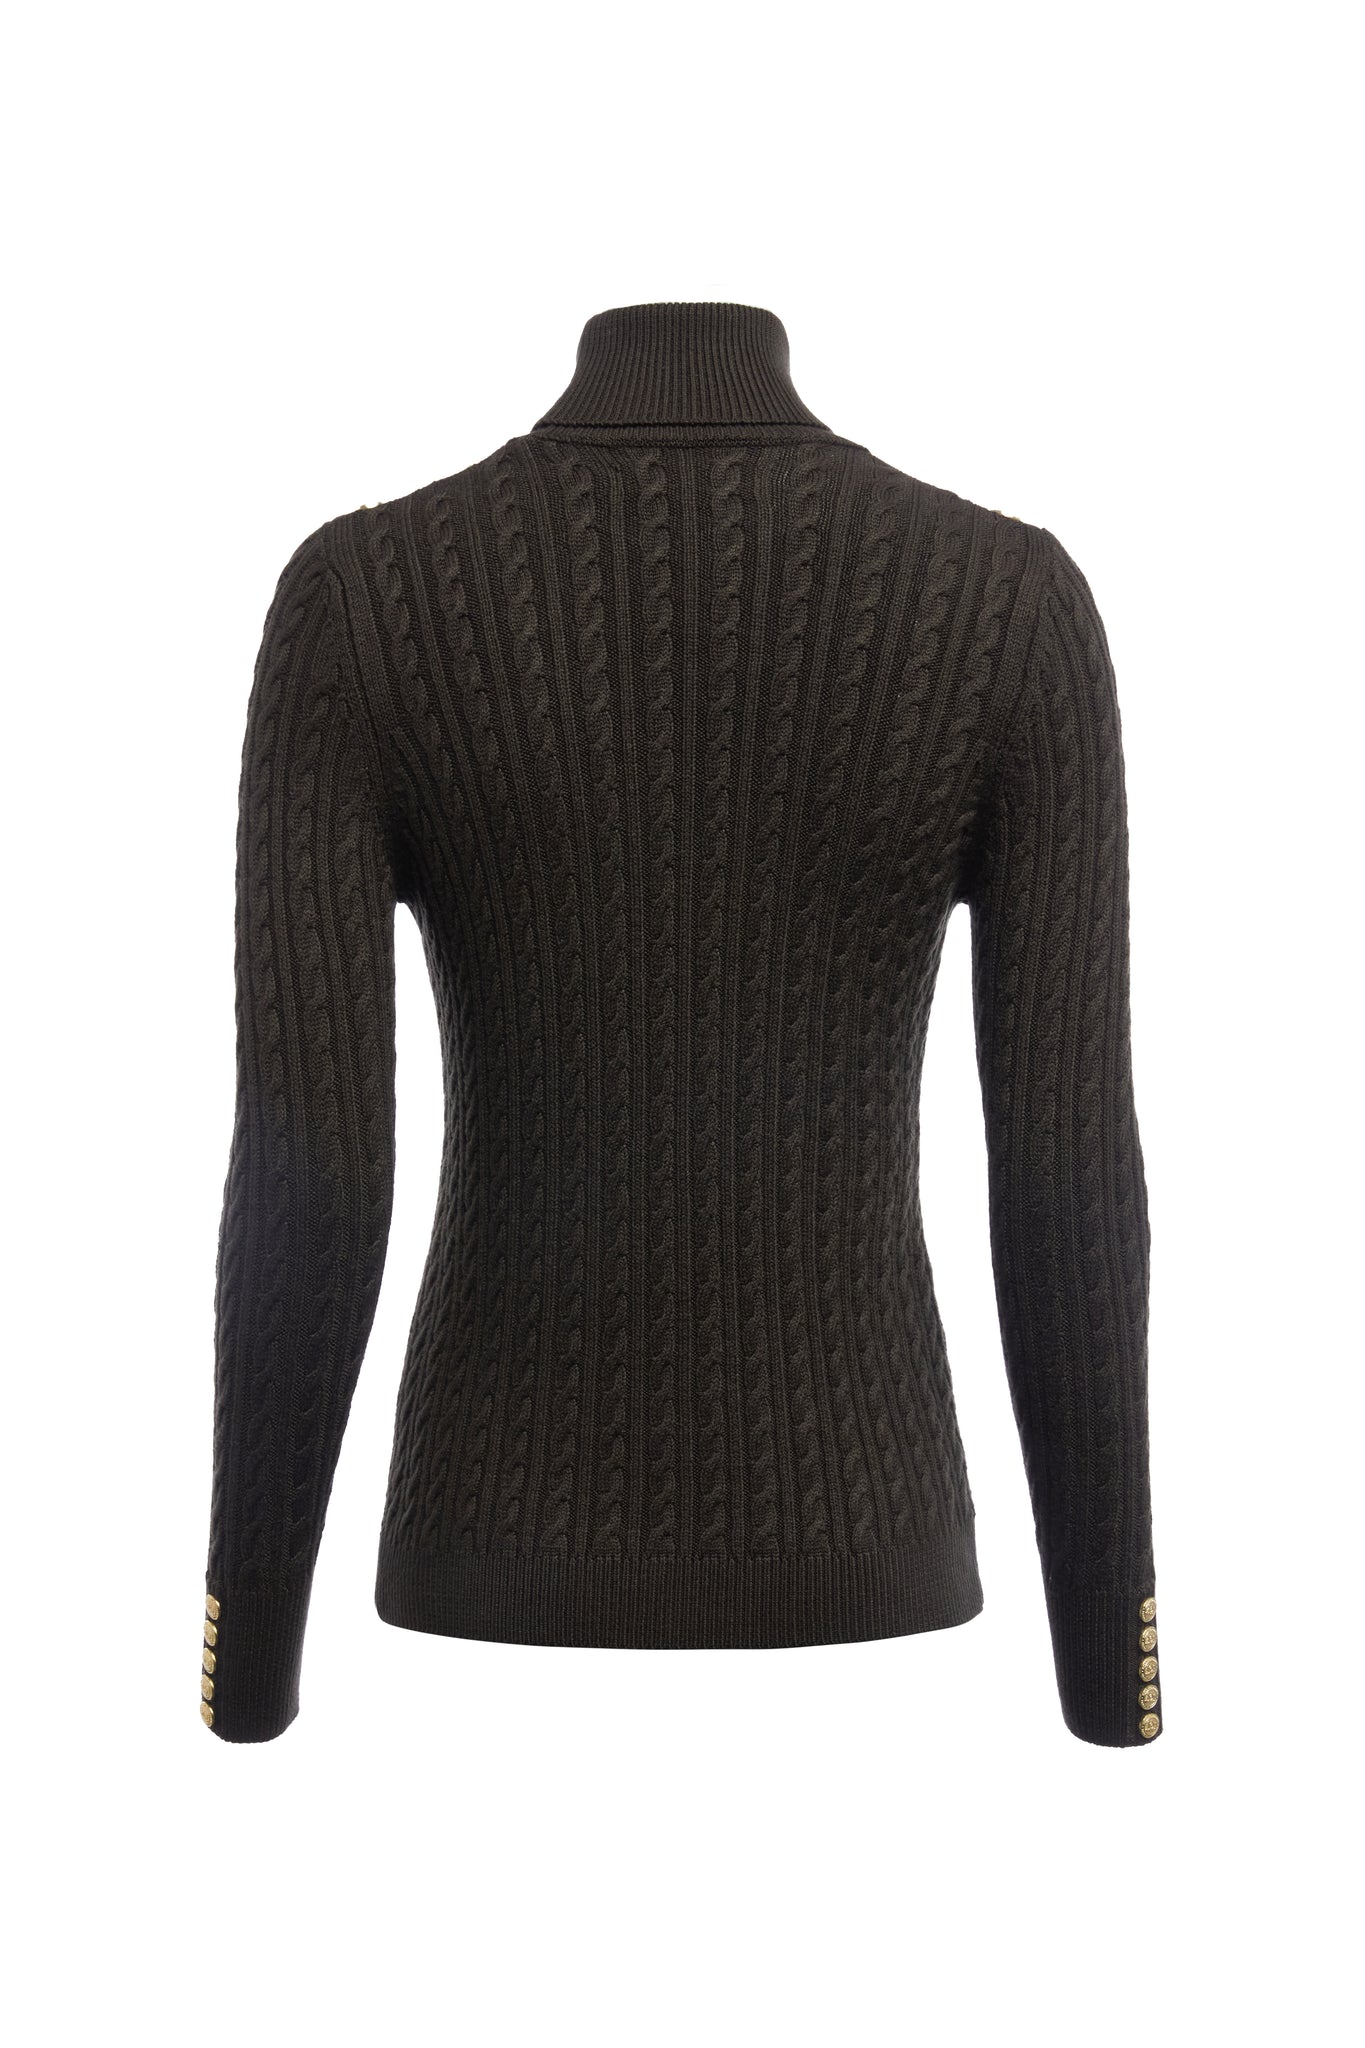 back of womens cable knit jumper in fern green with ribbed roll neck cuffs and hem